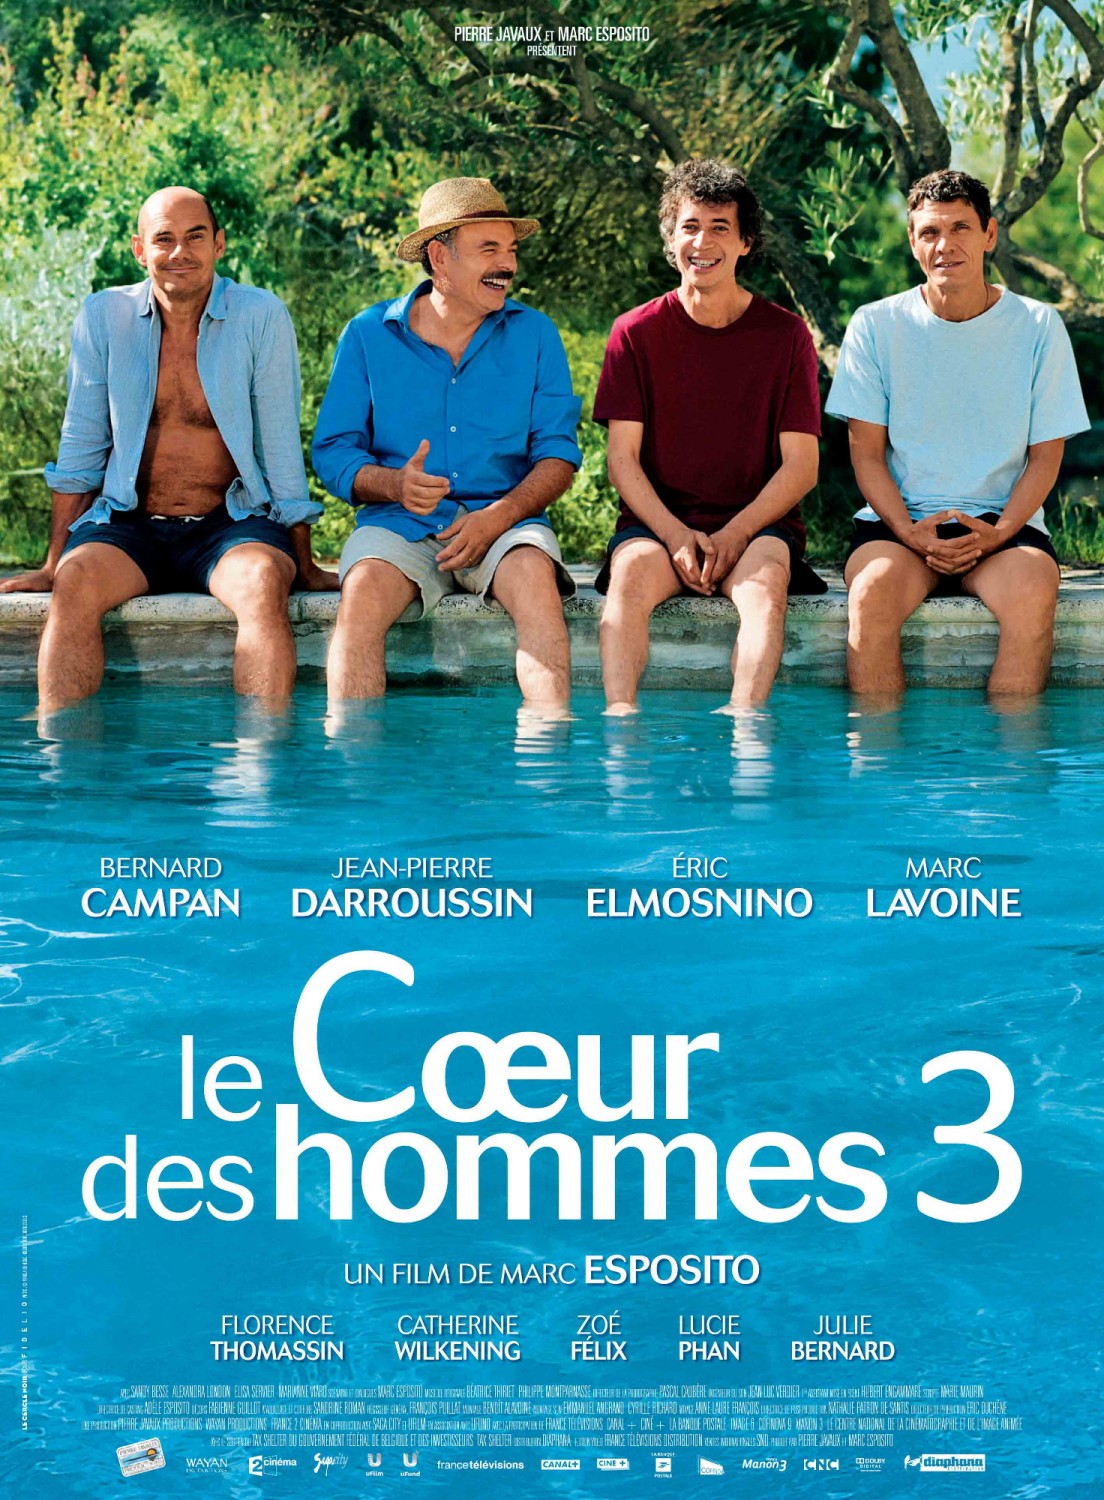 Extra Large Movie Poster Image for Le coeur des hommes 3 